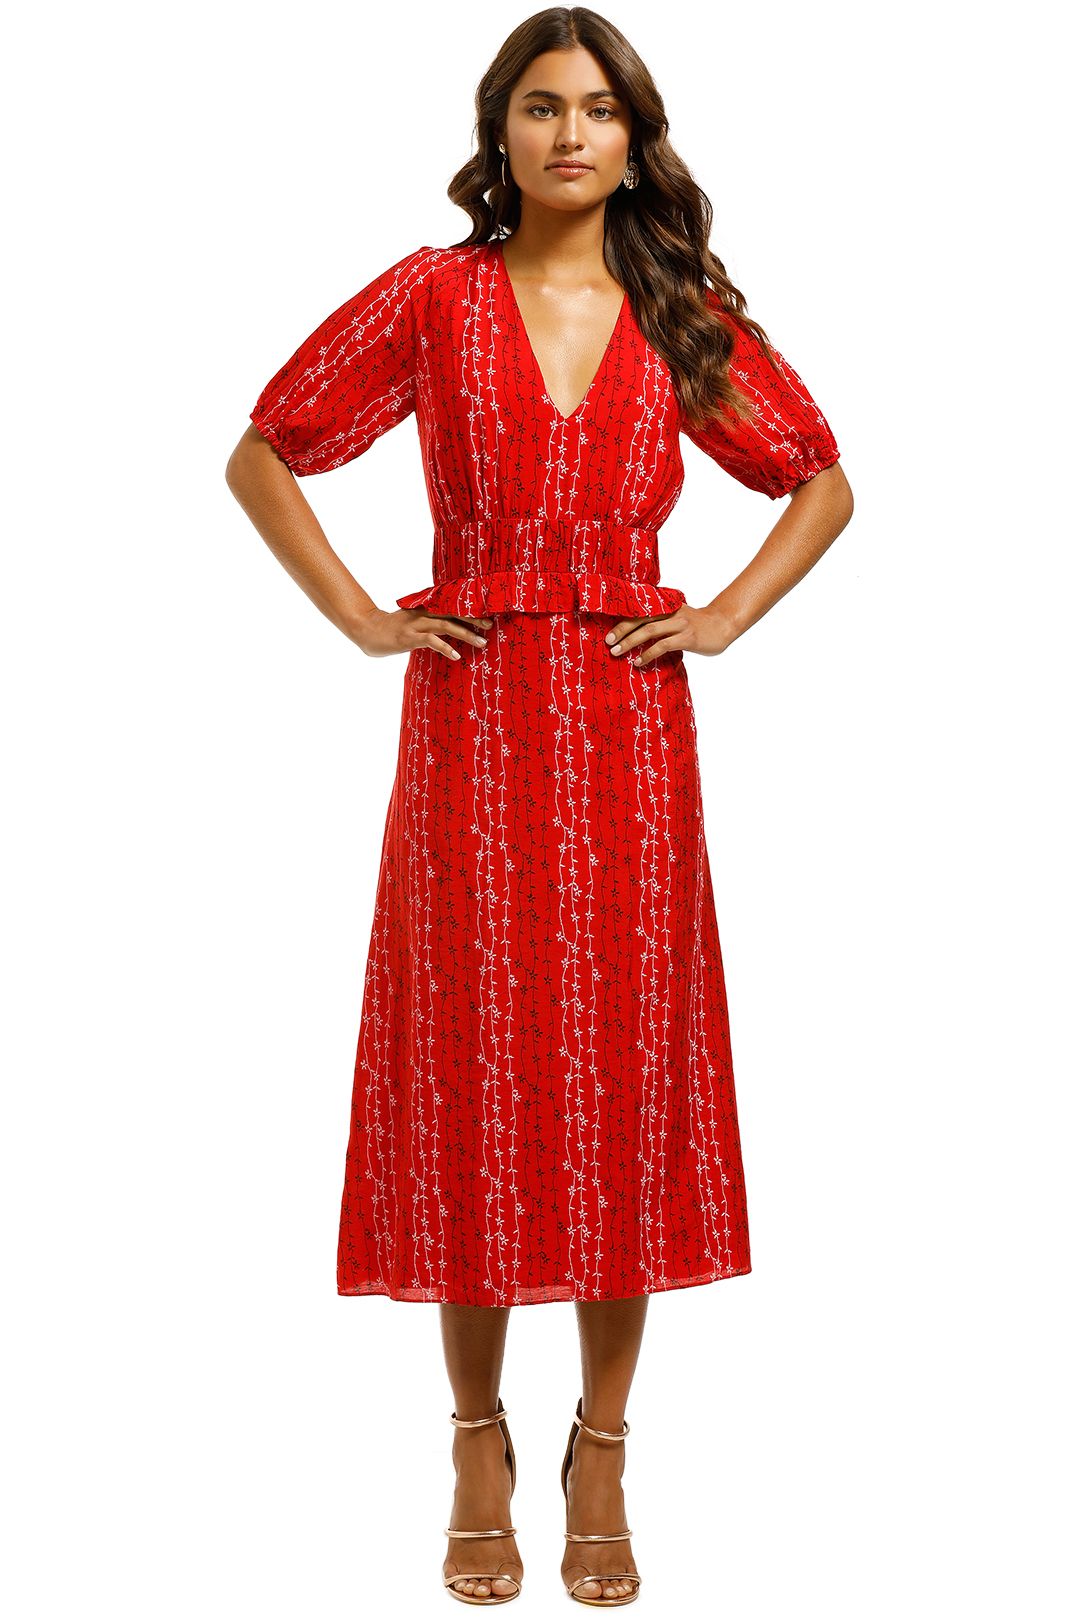 Stevie-May-Gracie-Midi-Dress-Red-Front